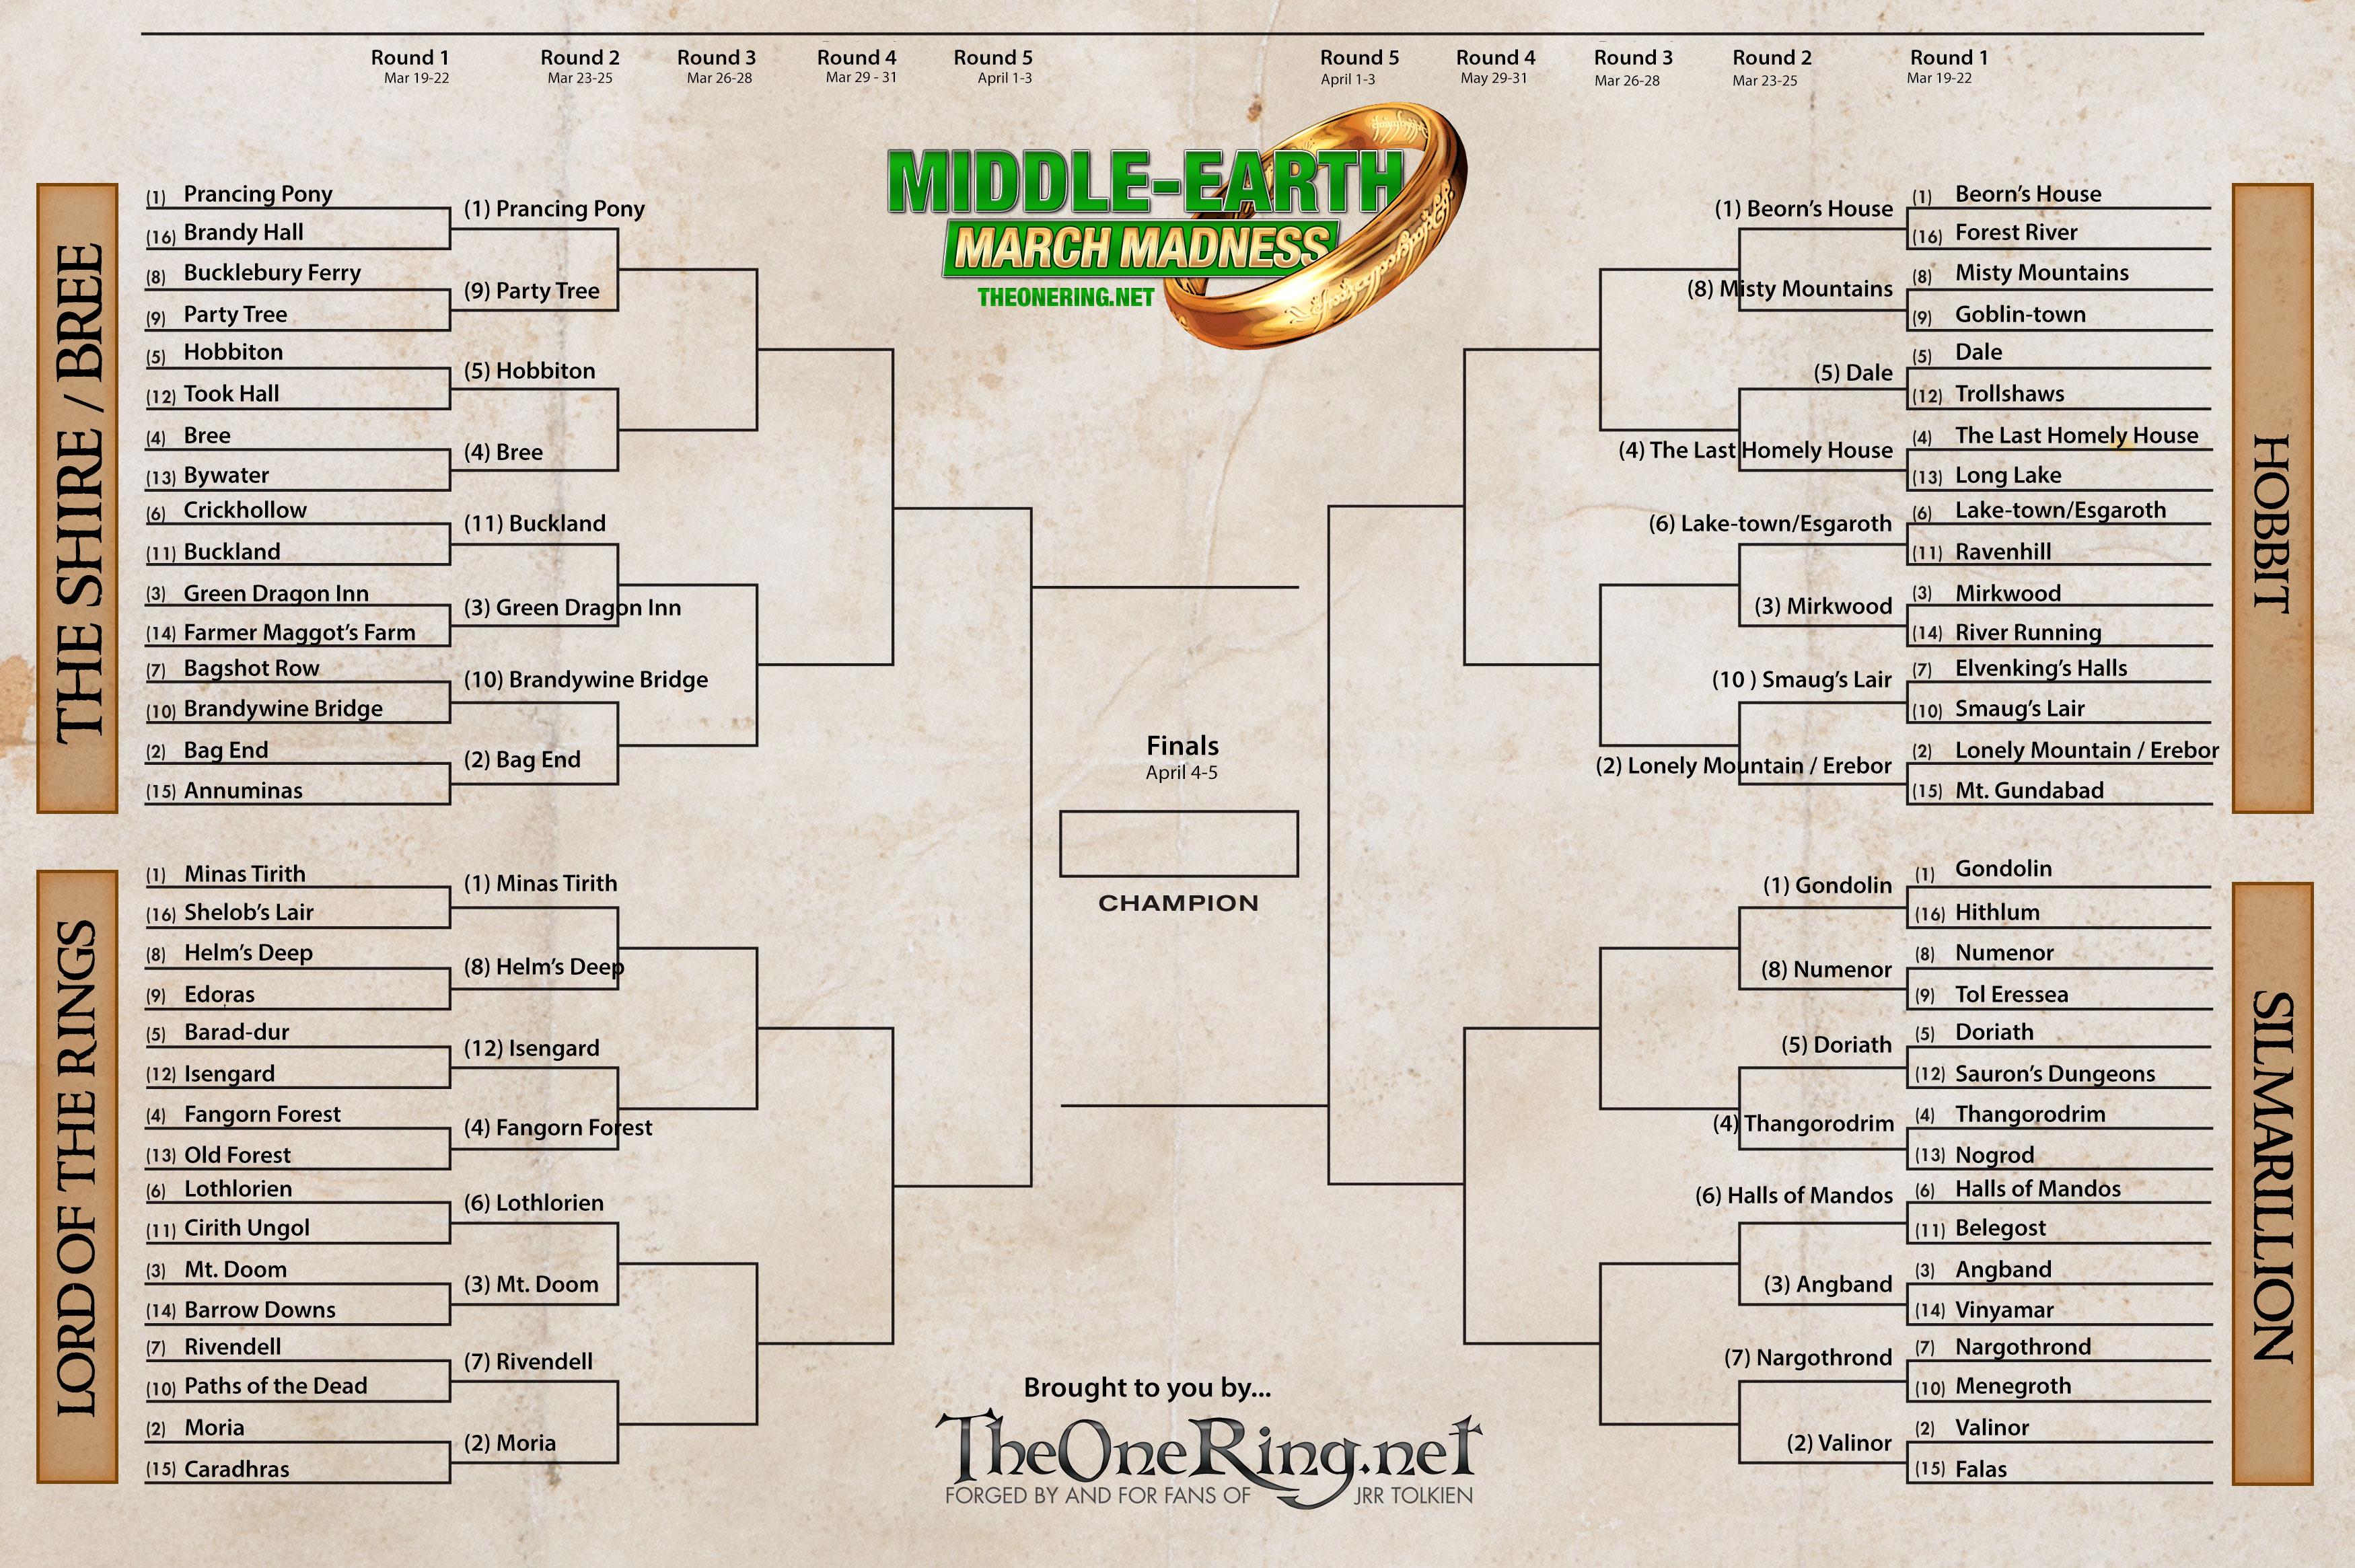 Middle Earth March Madness 2019 - Round 2 Match-ups Graphic